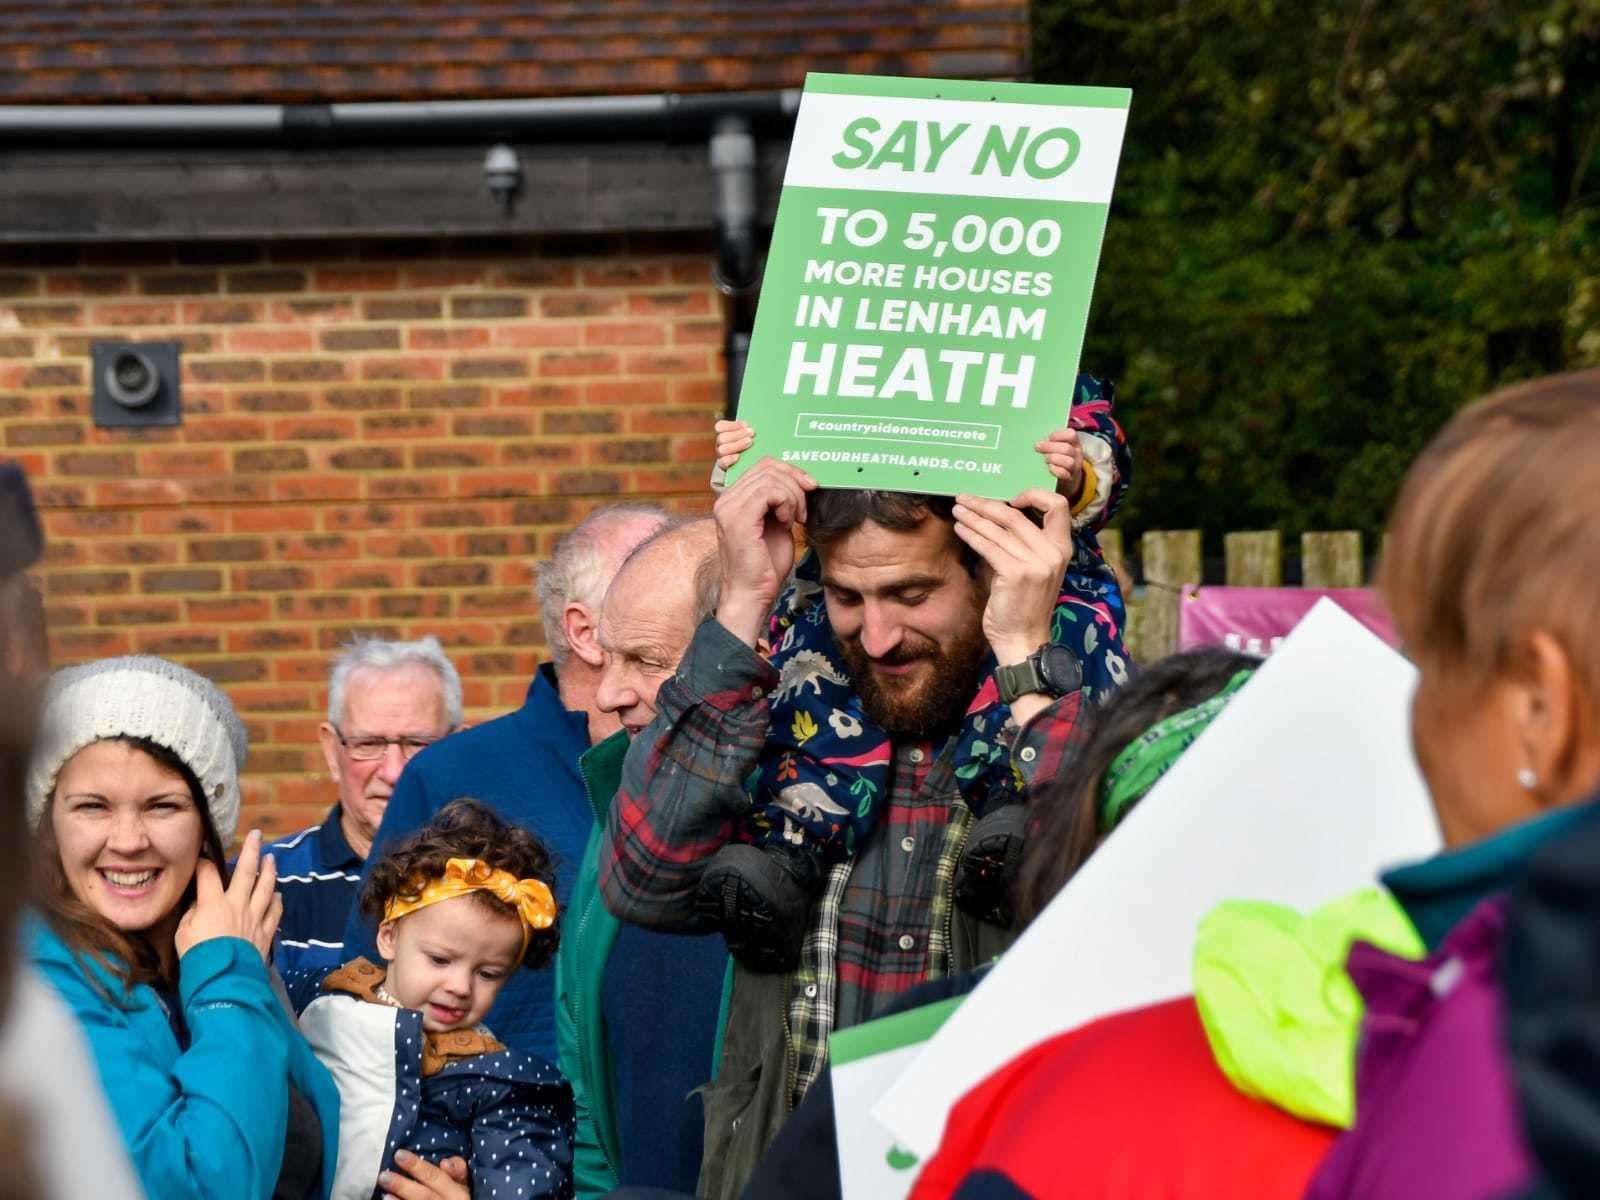 There was one clear message: Say No to homes on the heathland